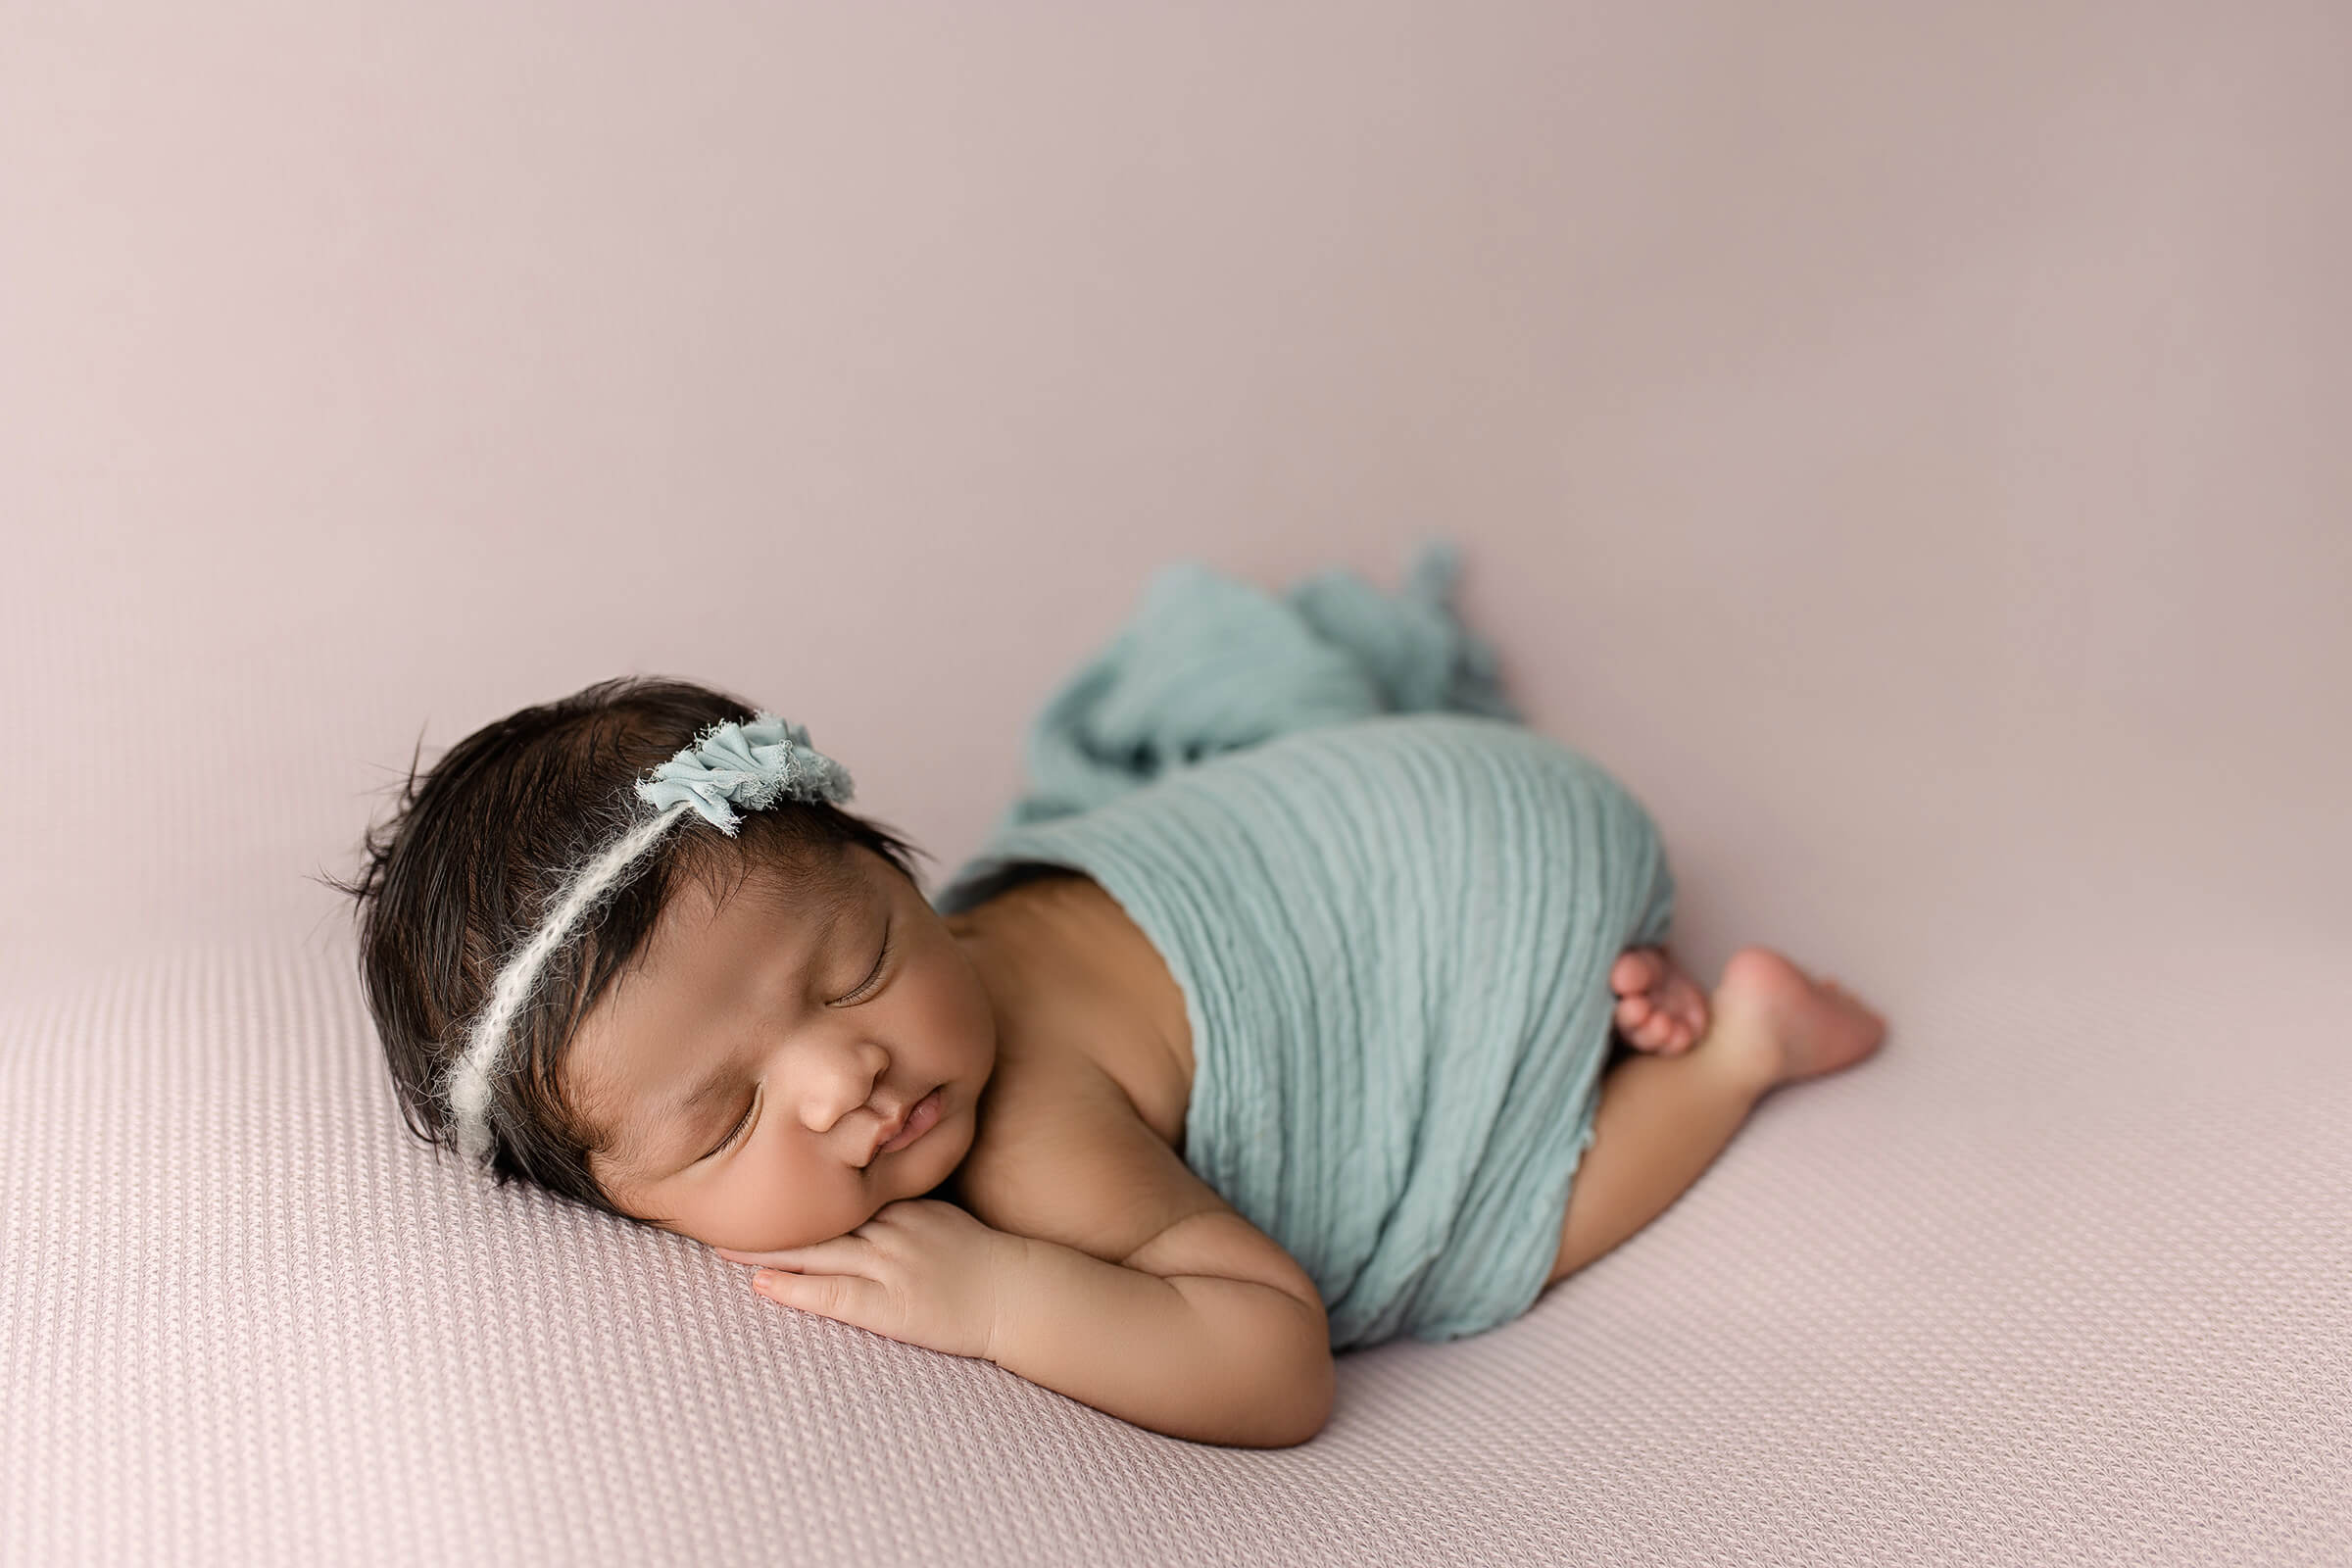 How to choose a newborn photographer in Austin